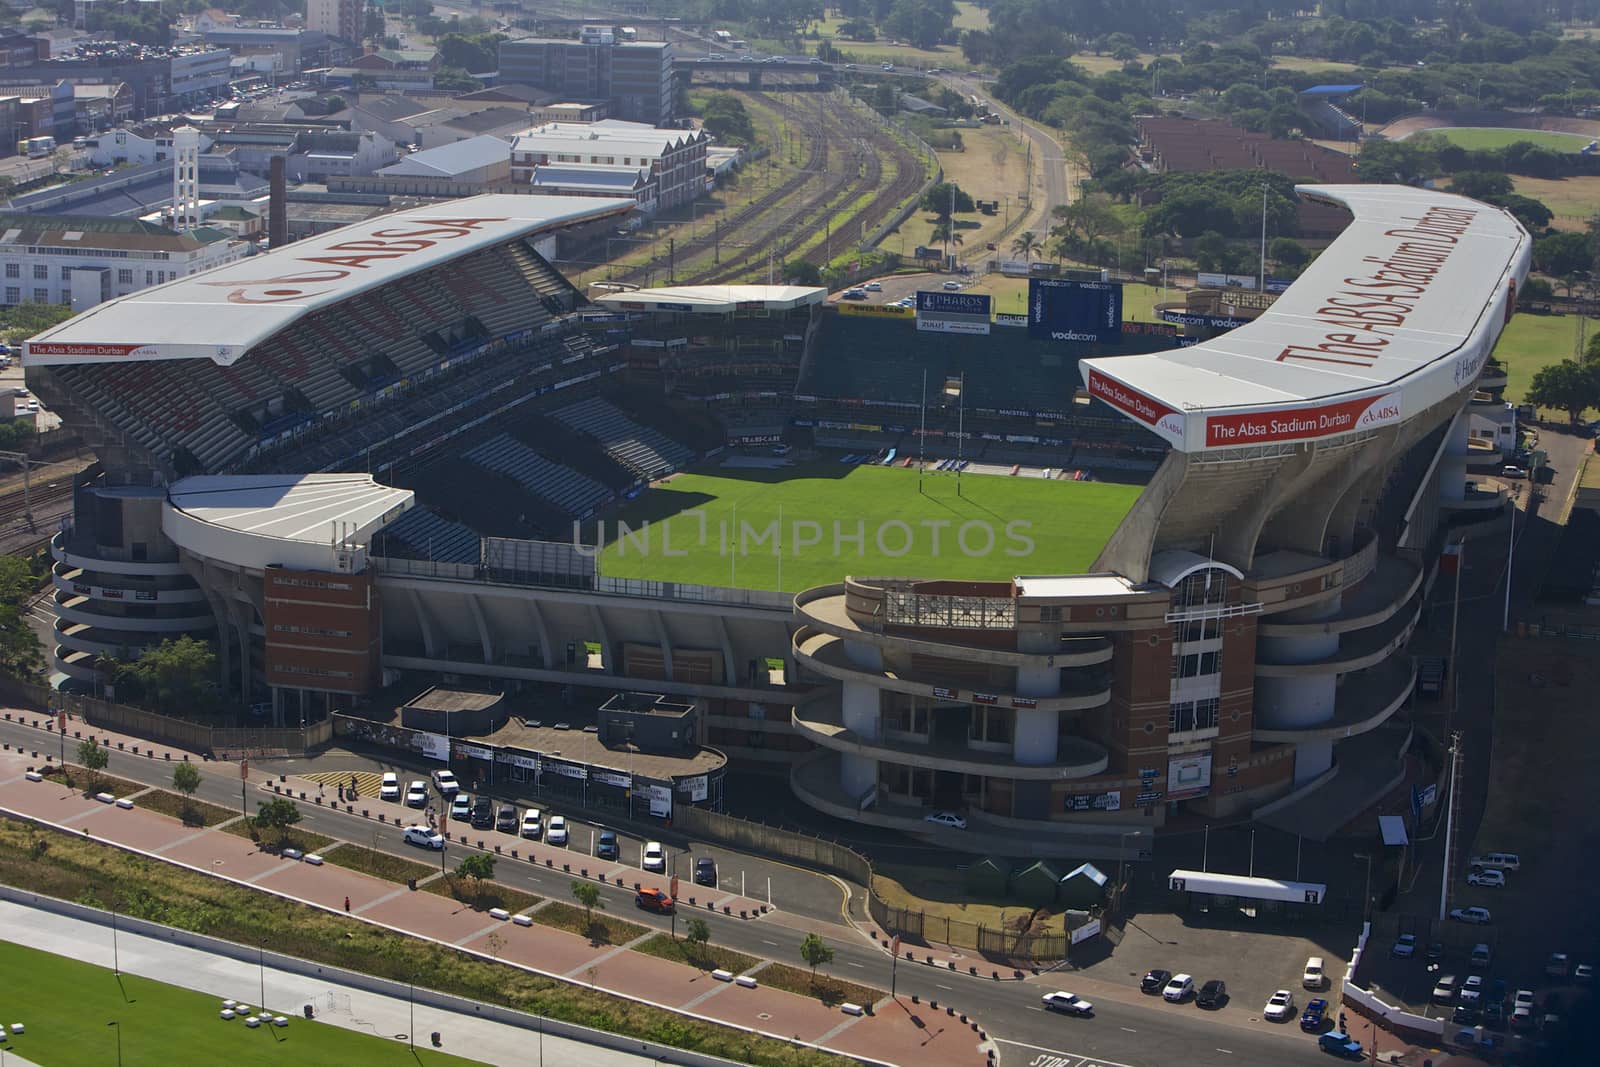 Overhead View of ABSA Stadium Kings Park Stadium in Durban South Africa.

Where Most of Rugby Games Were Hosted Photo Taken On: 04 April 2010